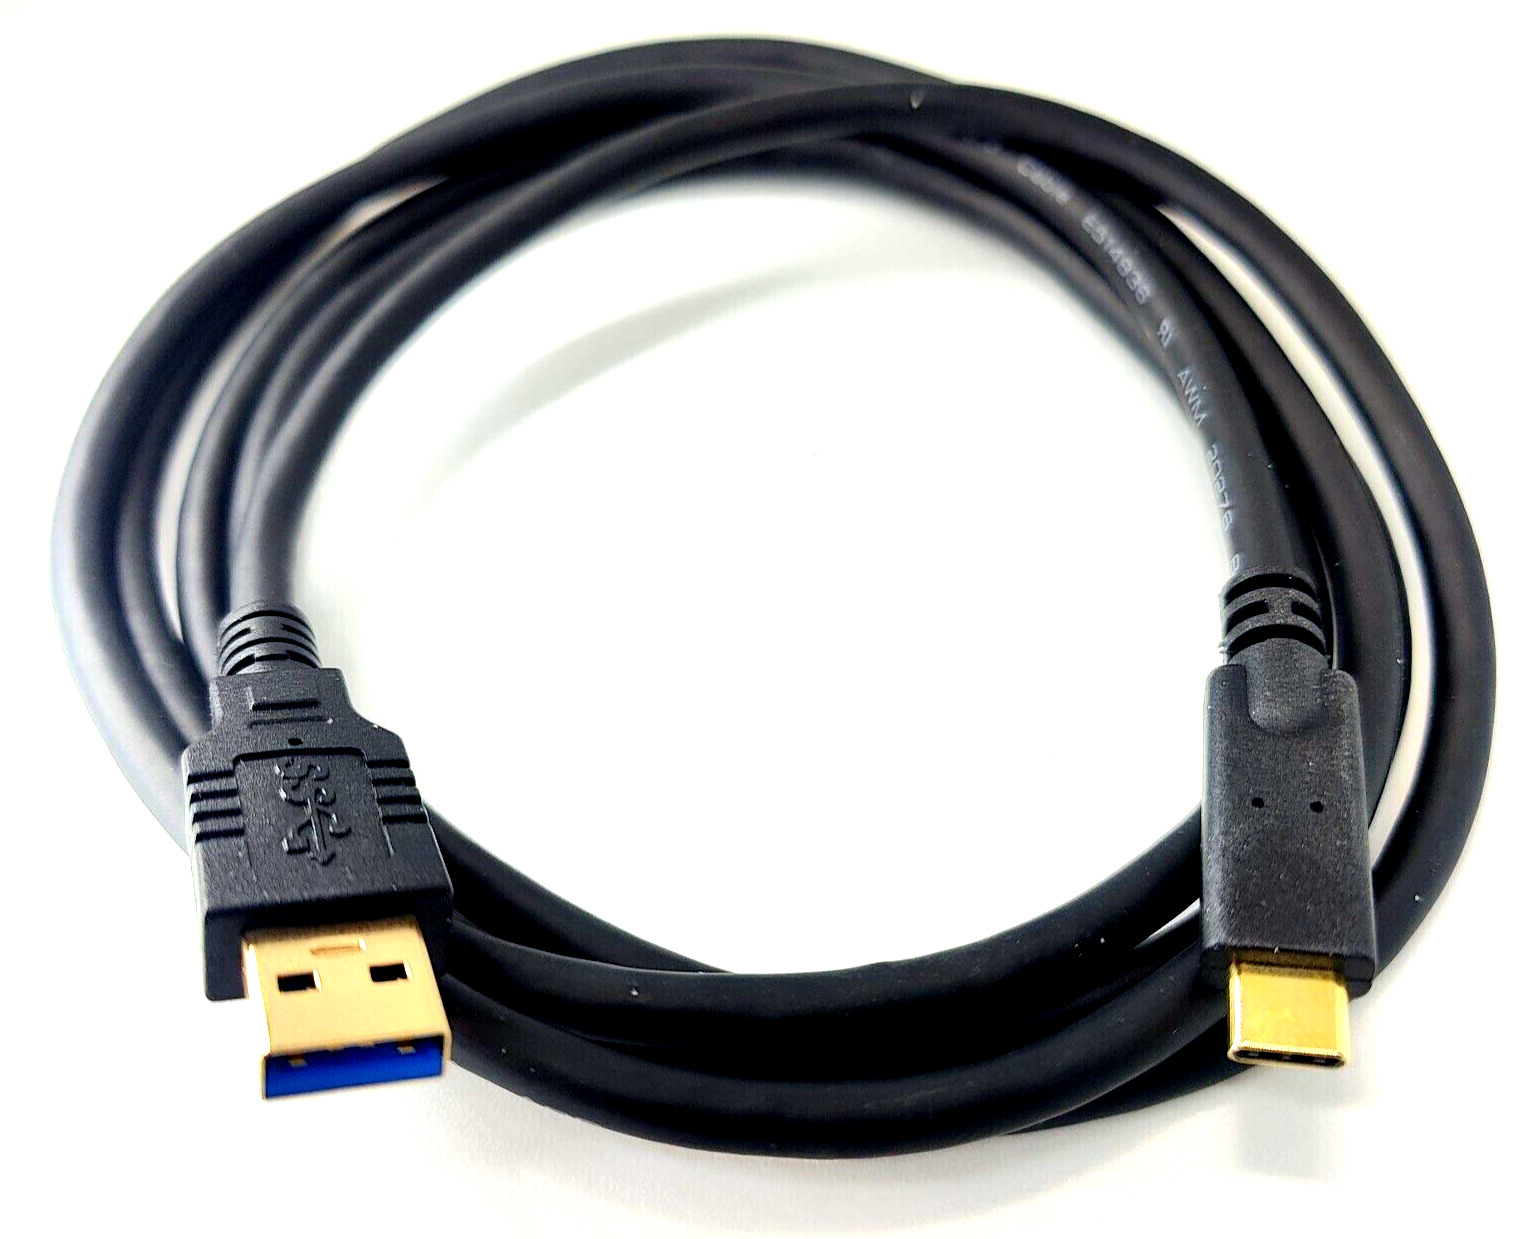 10Ft USB3.2 GEN2x1 (AKA USB3.1 GEN2) 10G TYPE-C MALE TO TYPE-A MALE CABLE